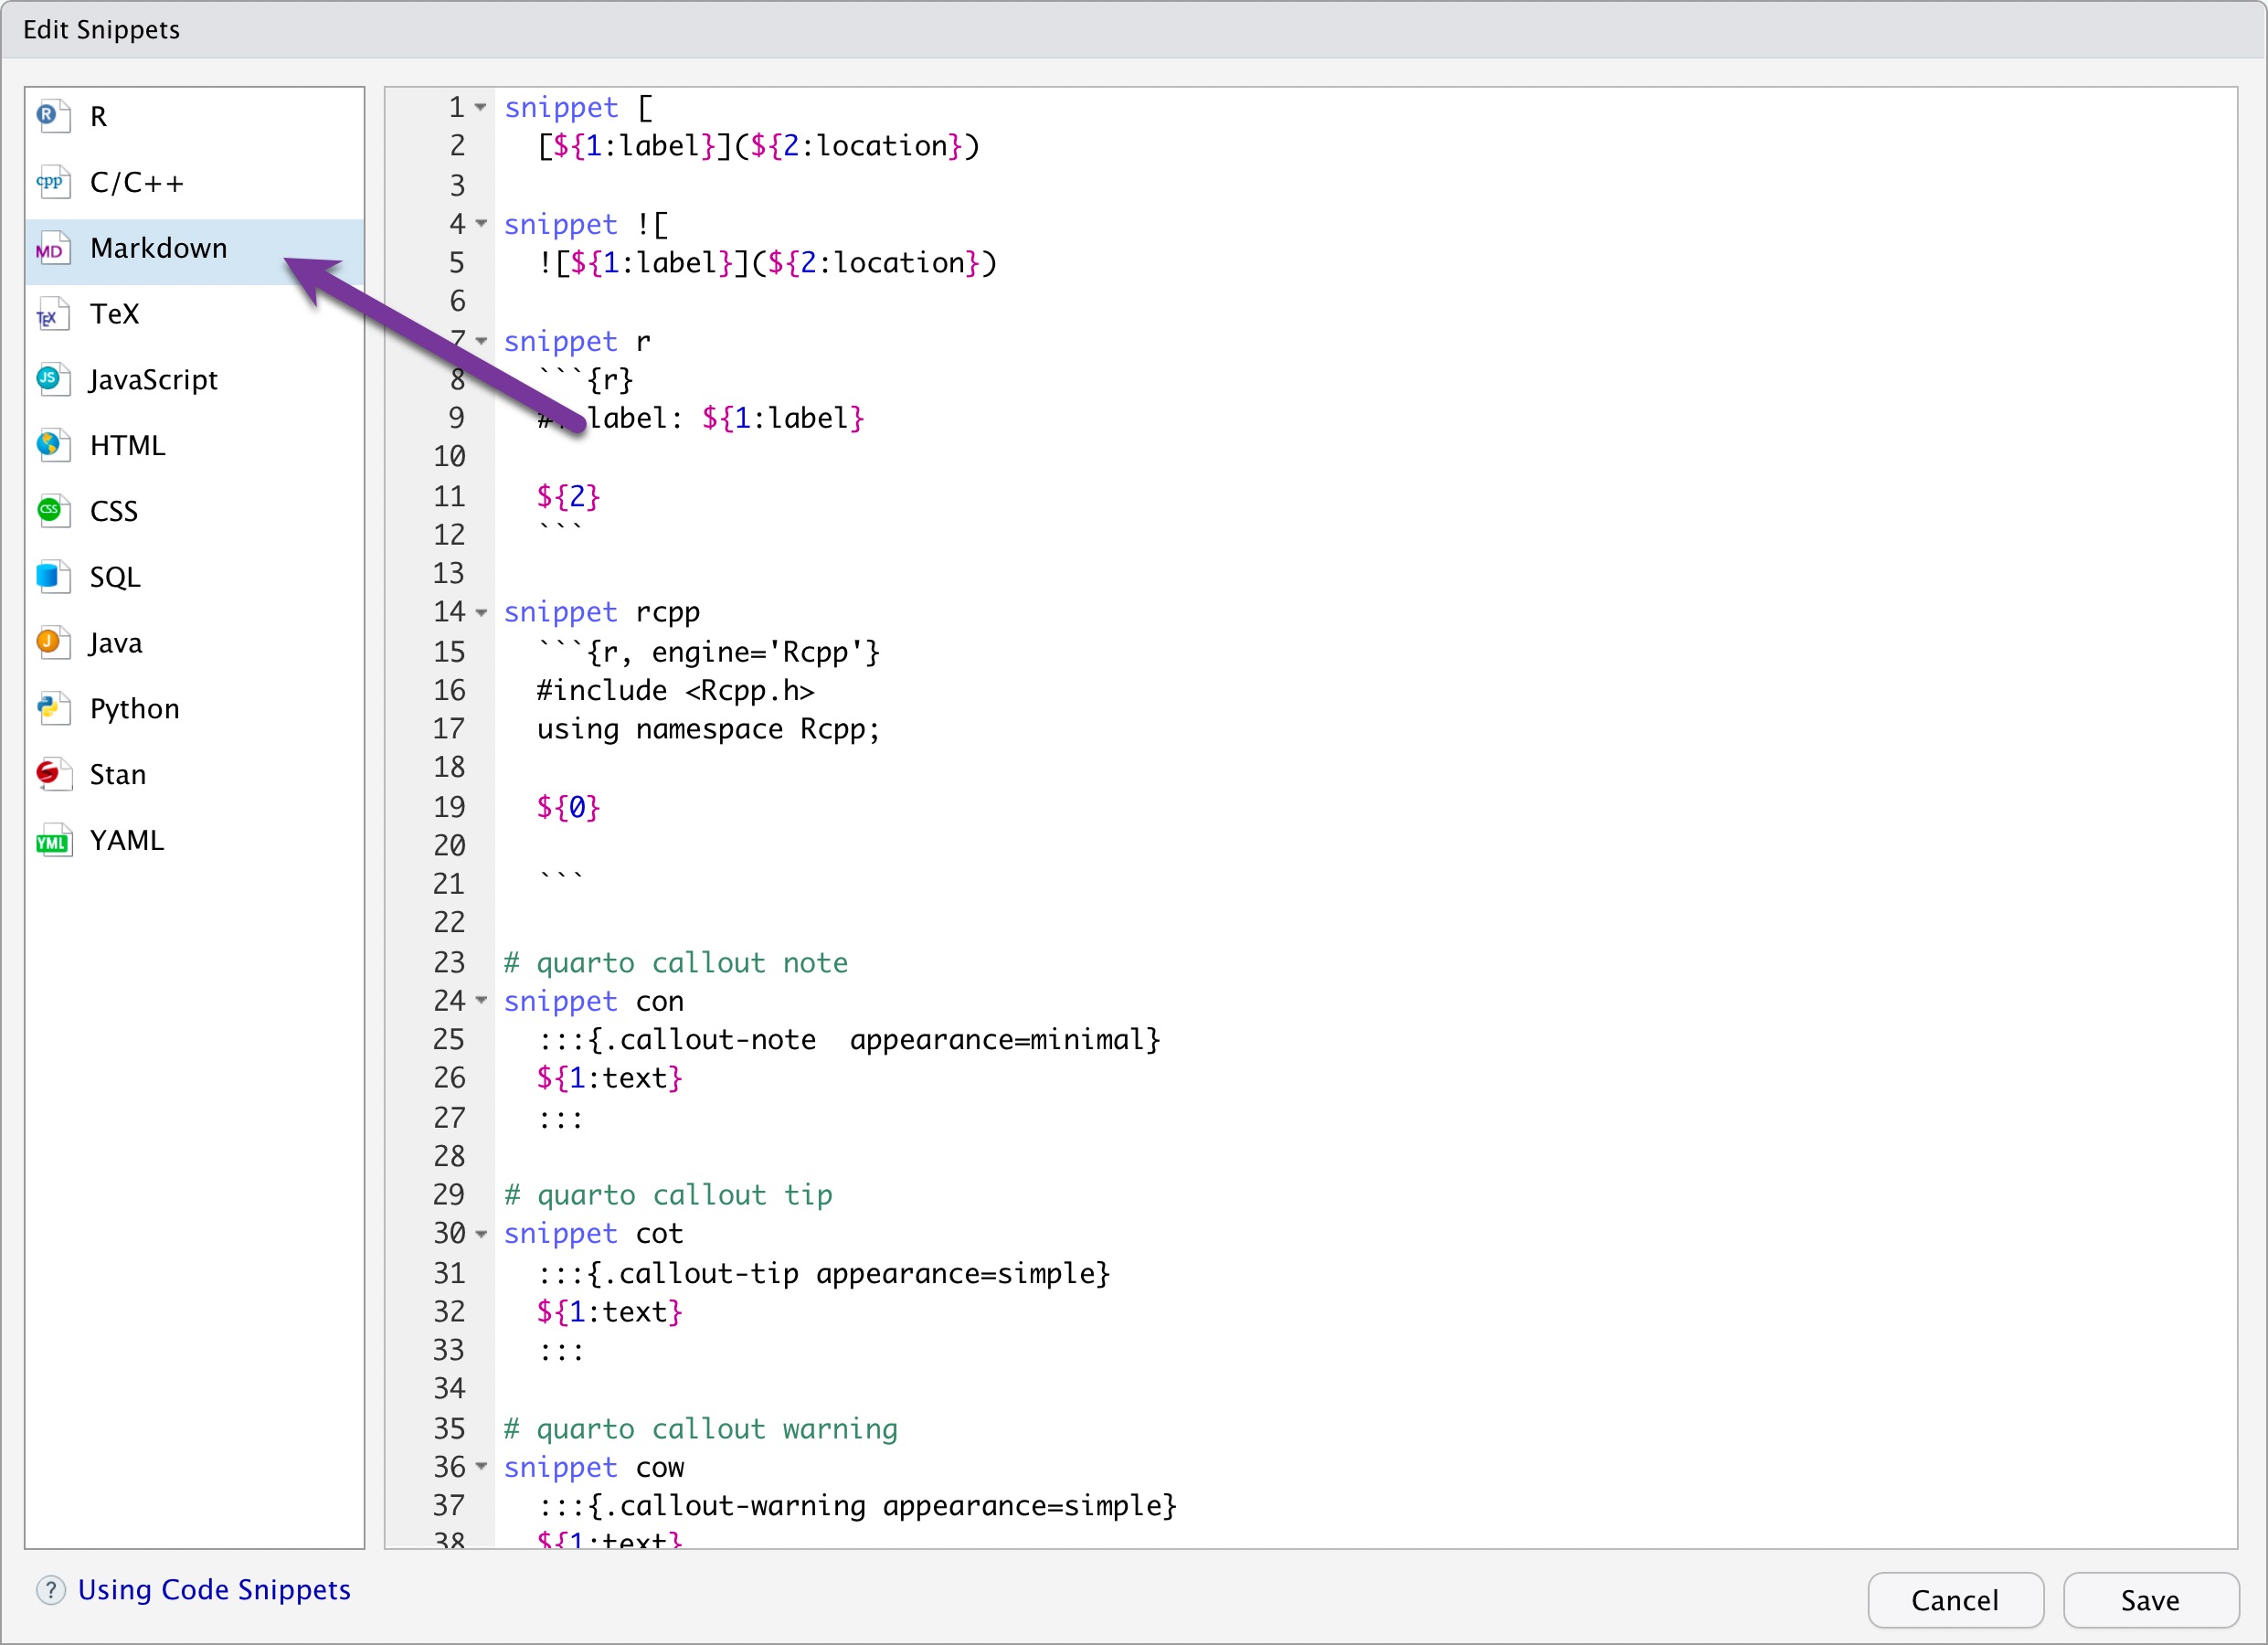 Screenshot showing the Edit Snippet Window with an arrow pointing to the Markdown windowpane.